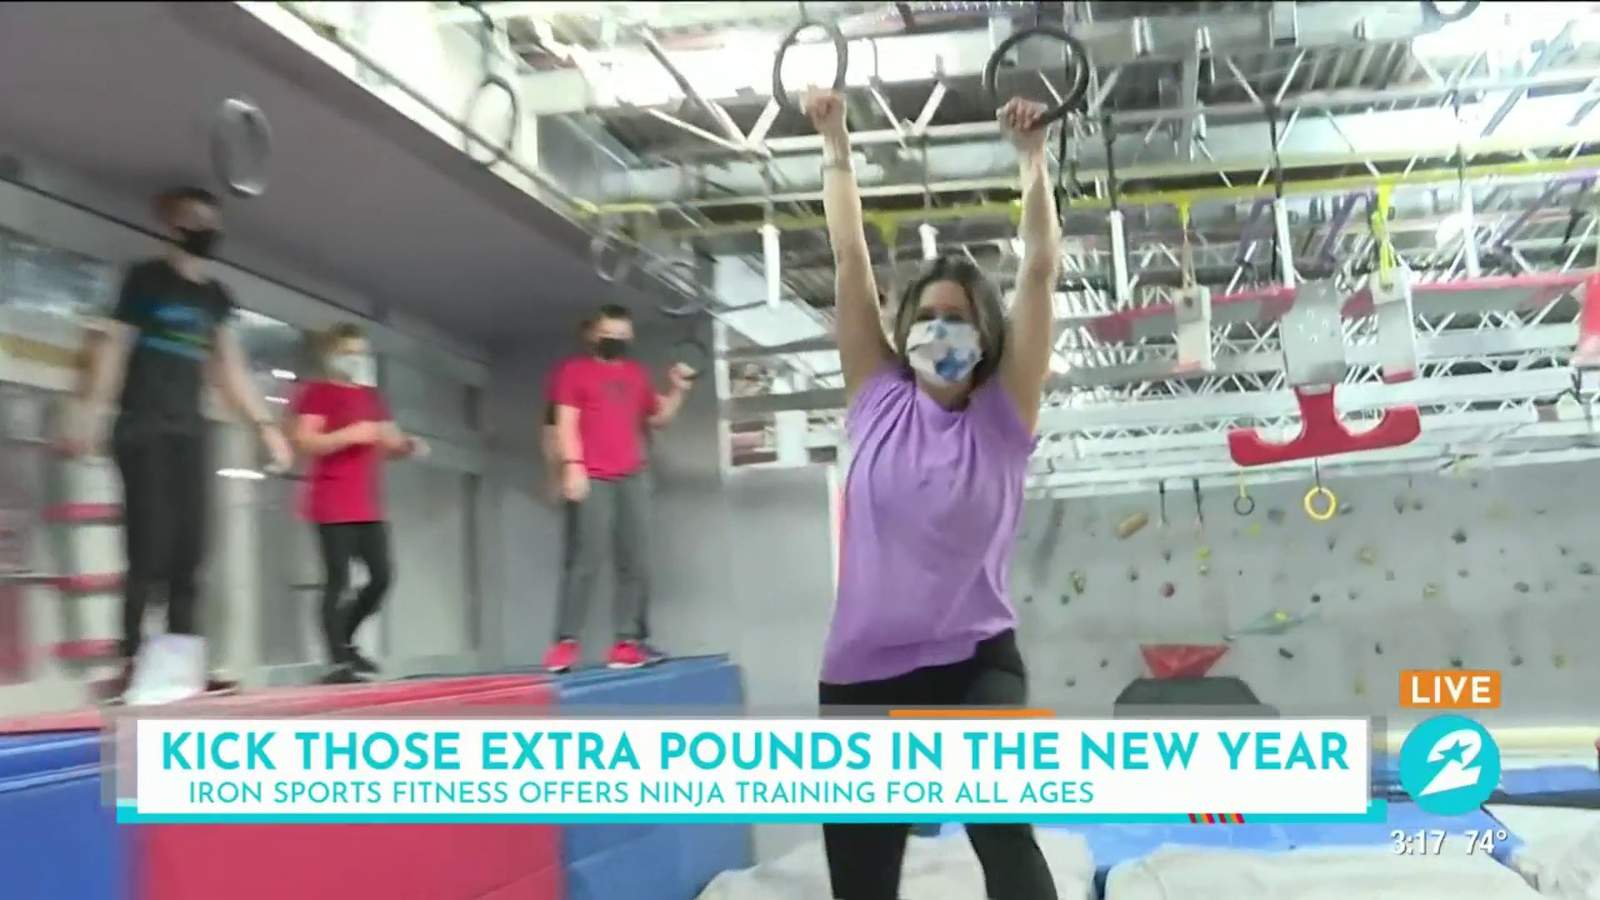 Train like a NINJA in the new year at Iron Sports Fitness Houston